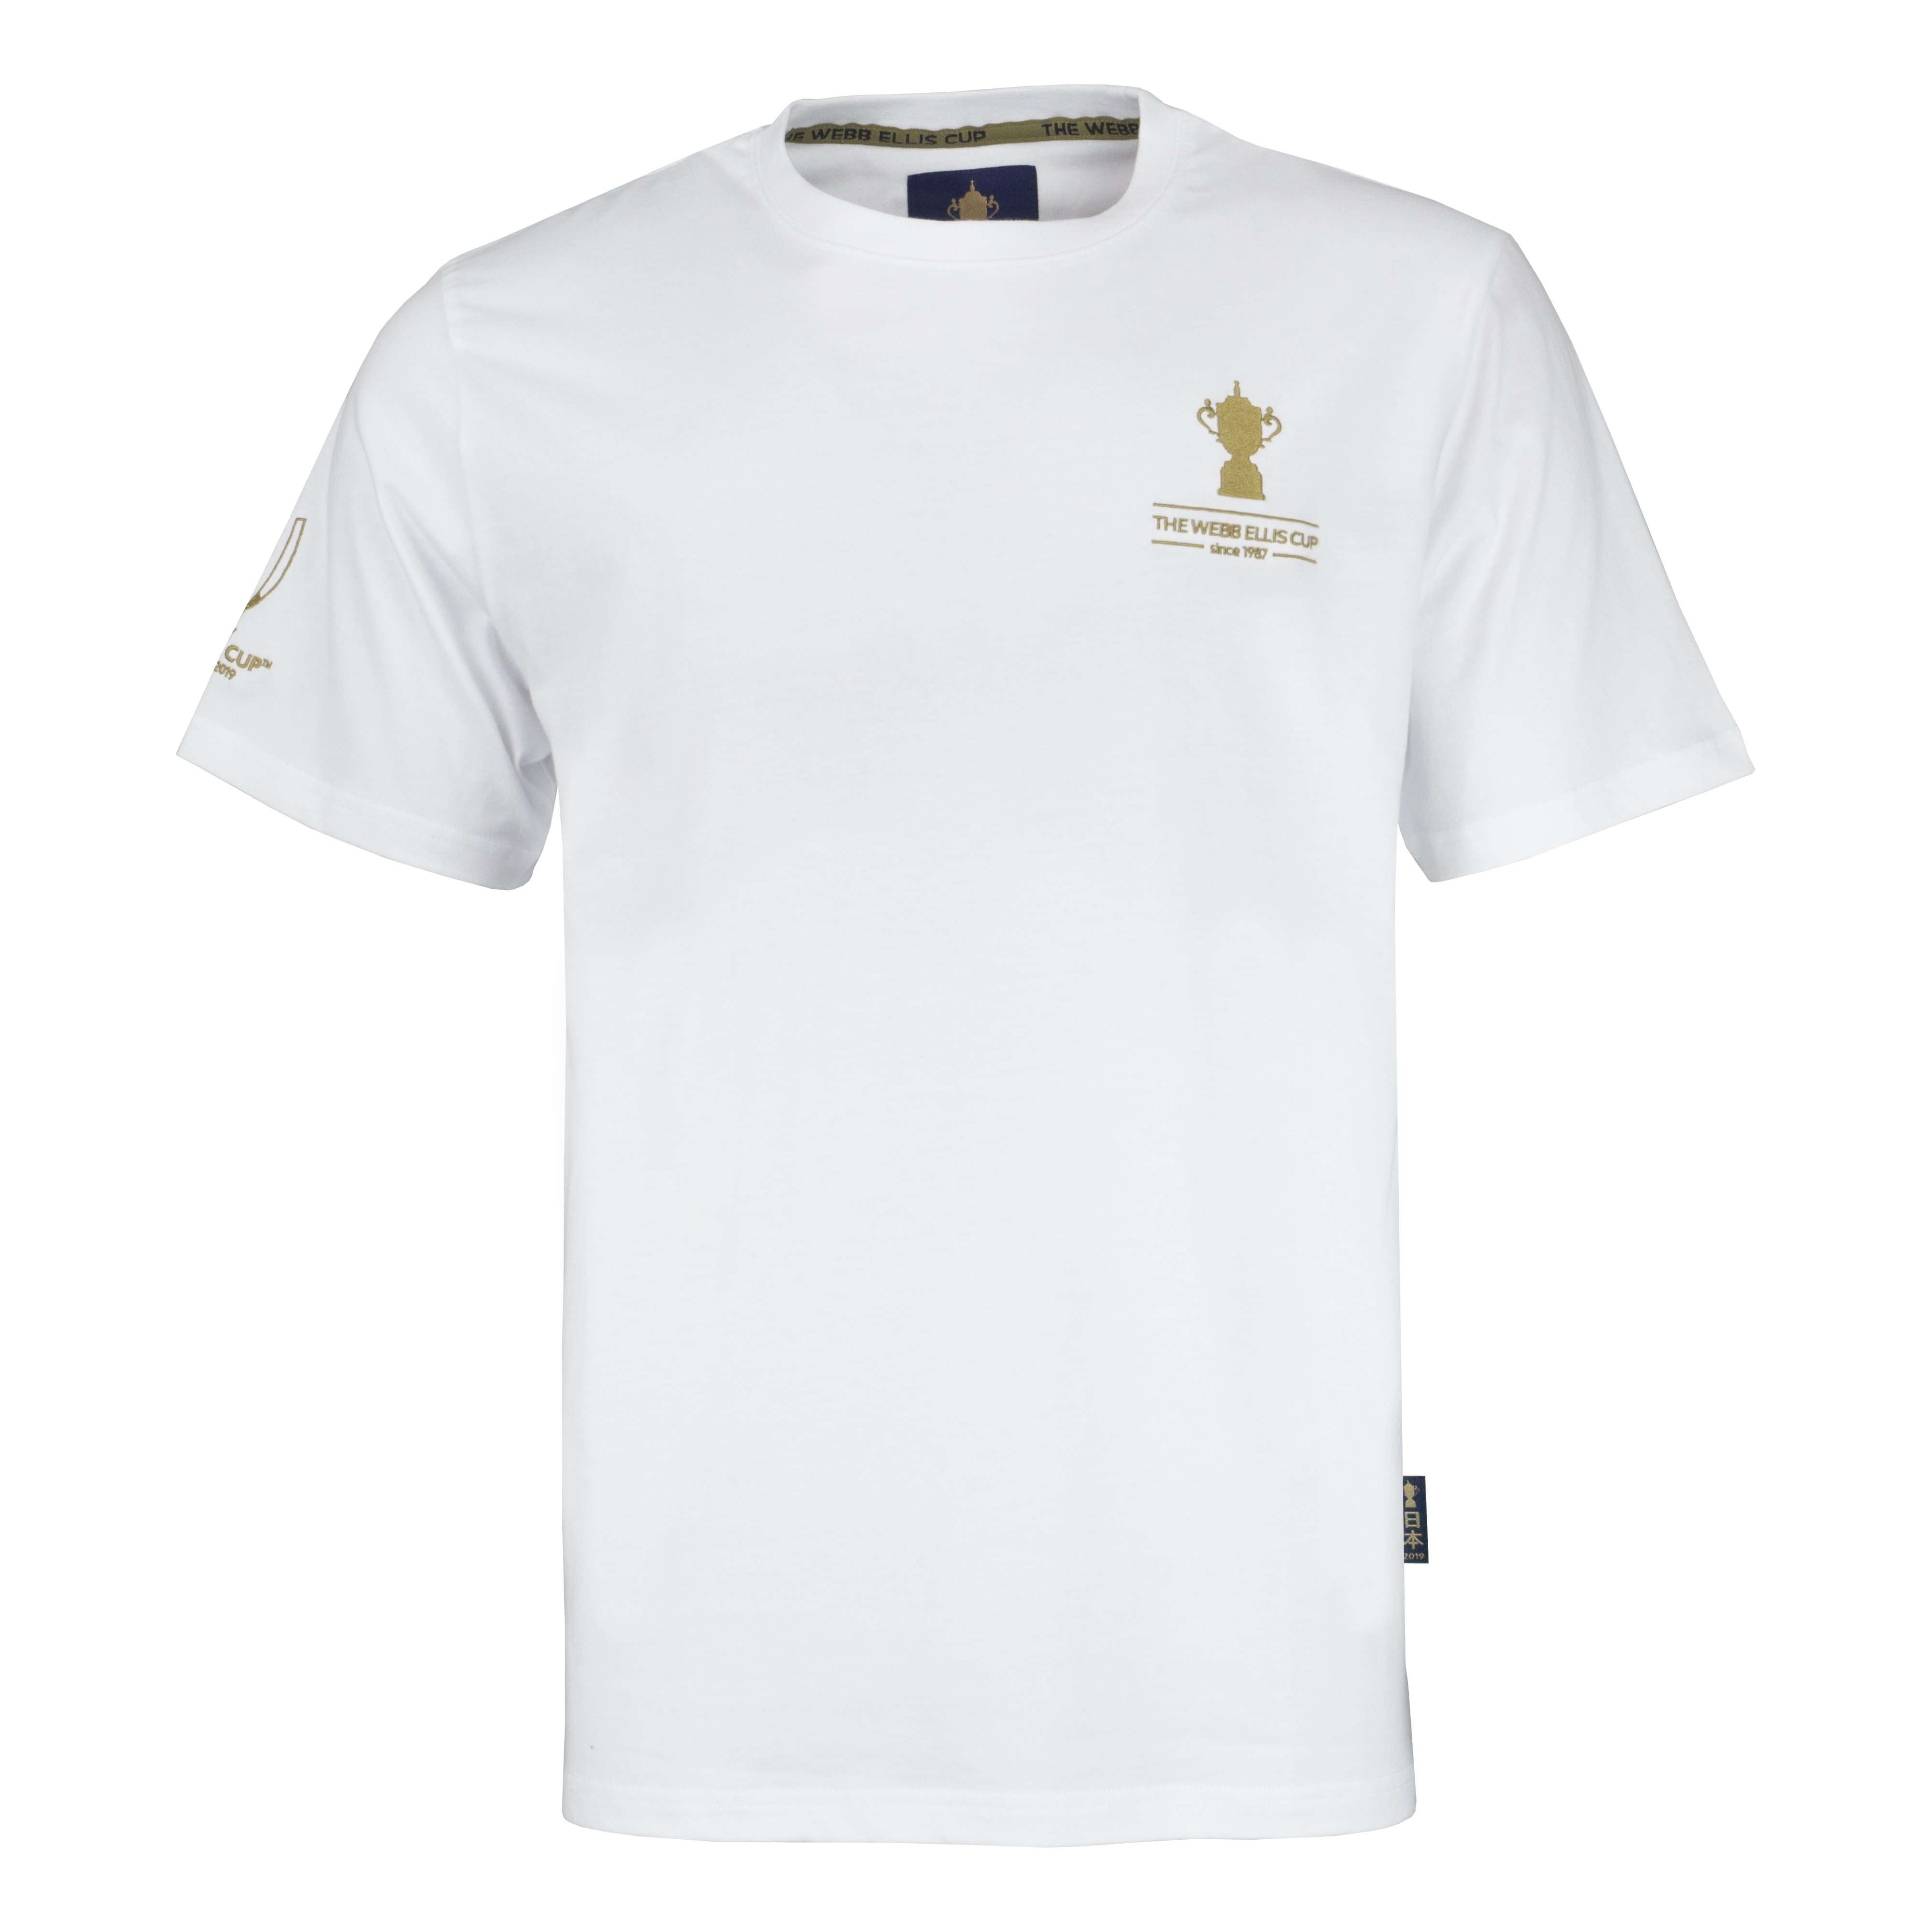 Webb Ellis Cup T-shirt - White | Official Rugby World Cup 2019 Shop